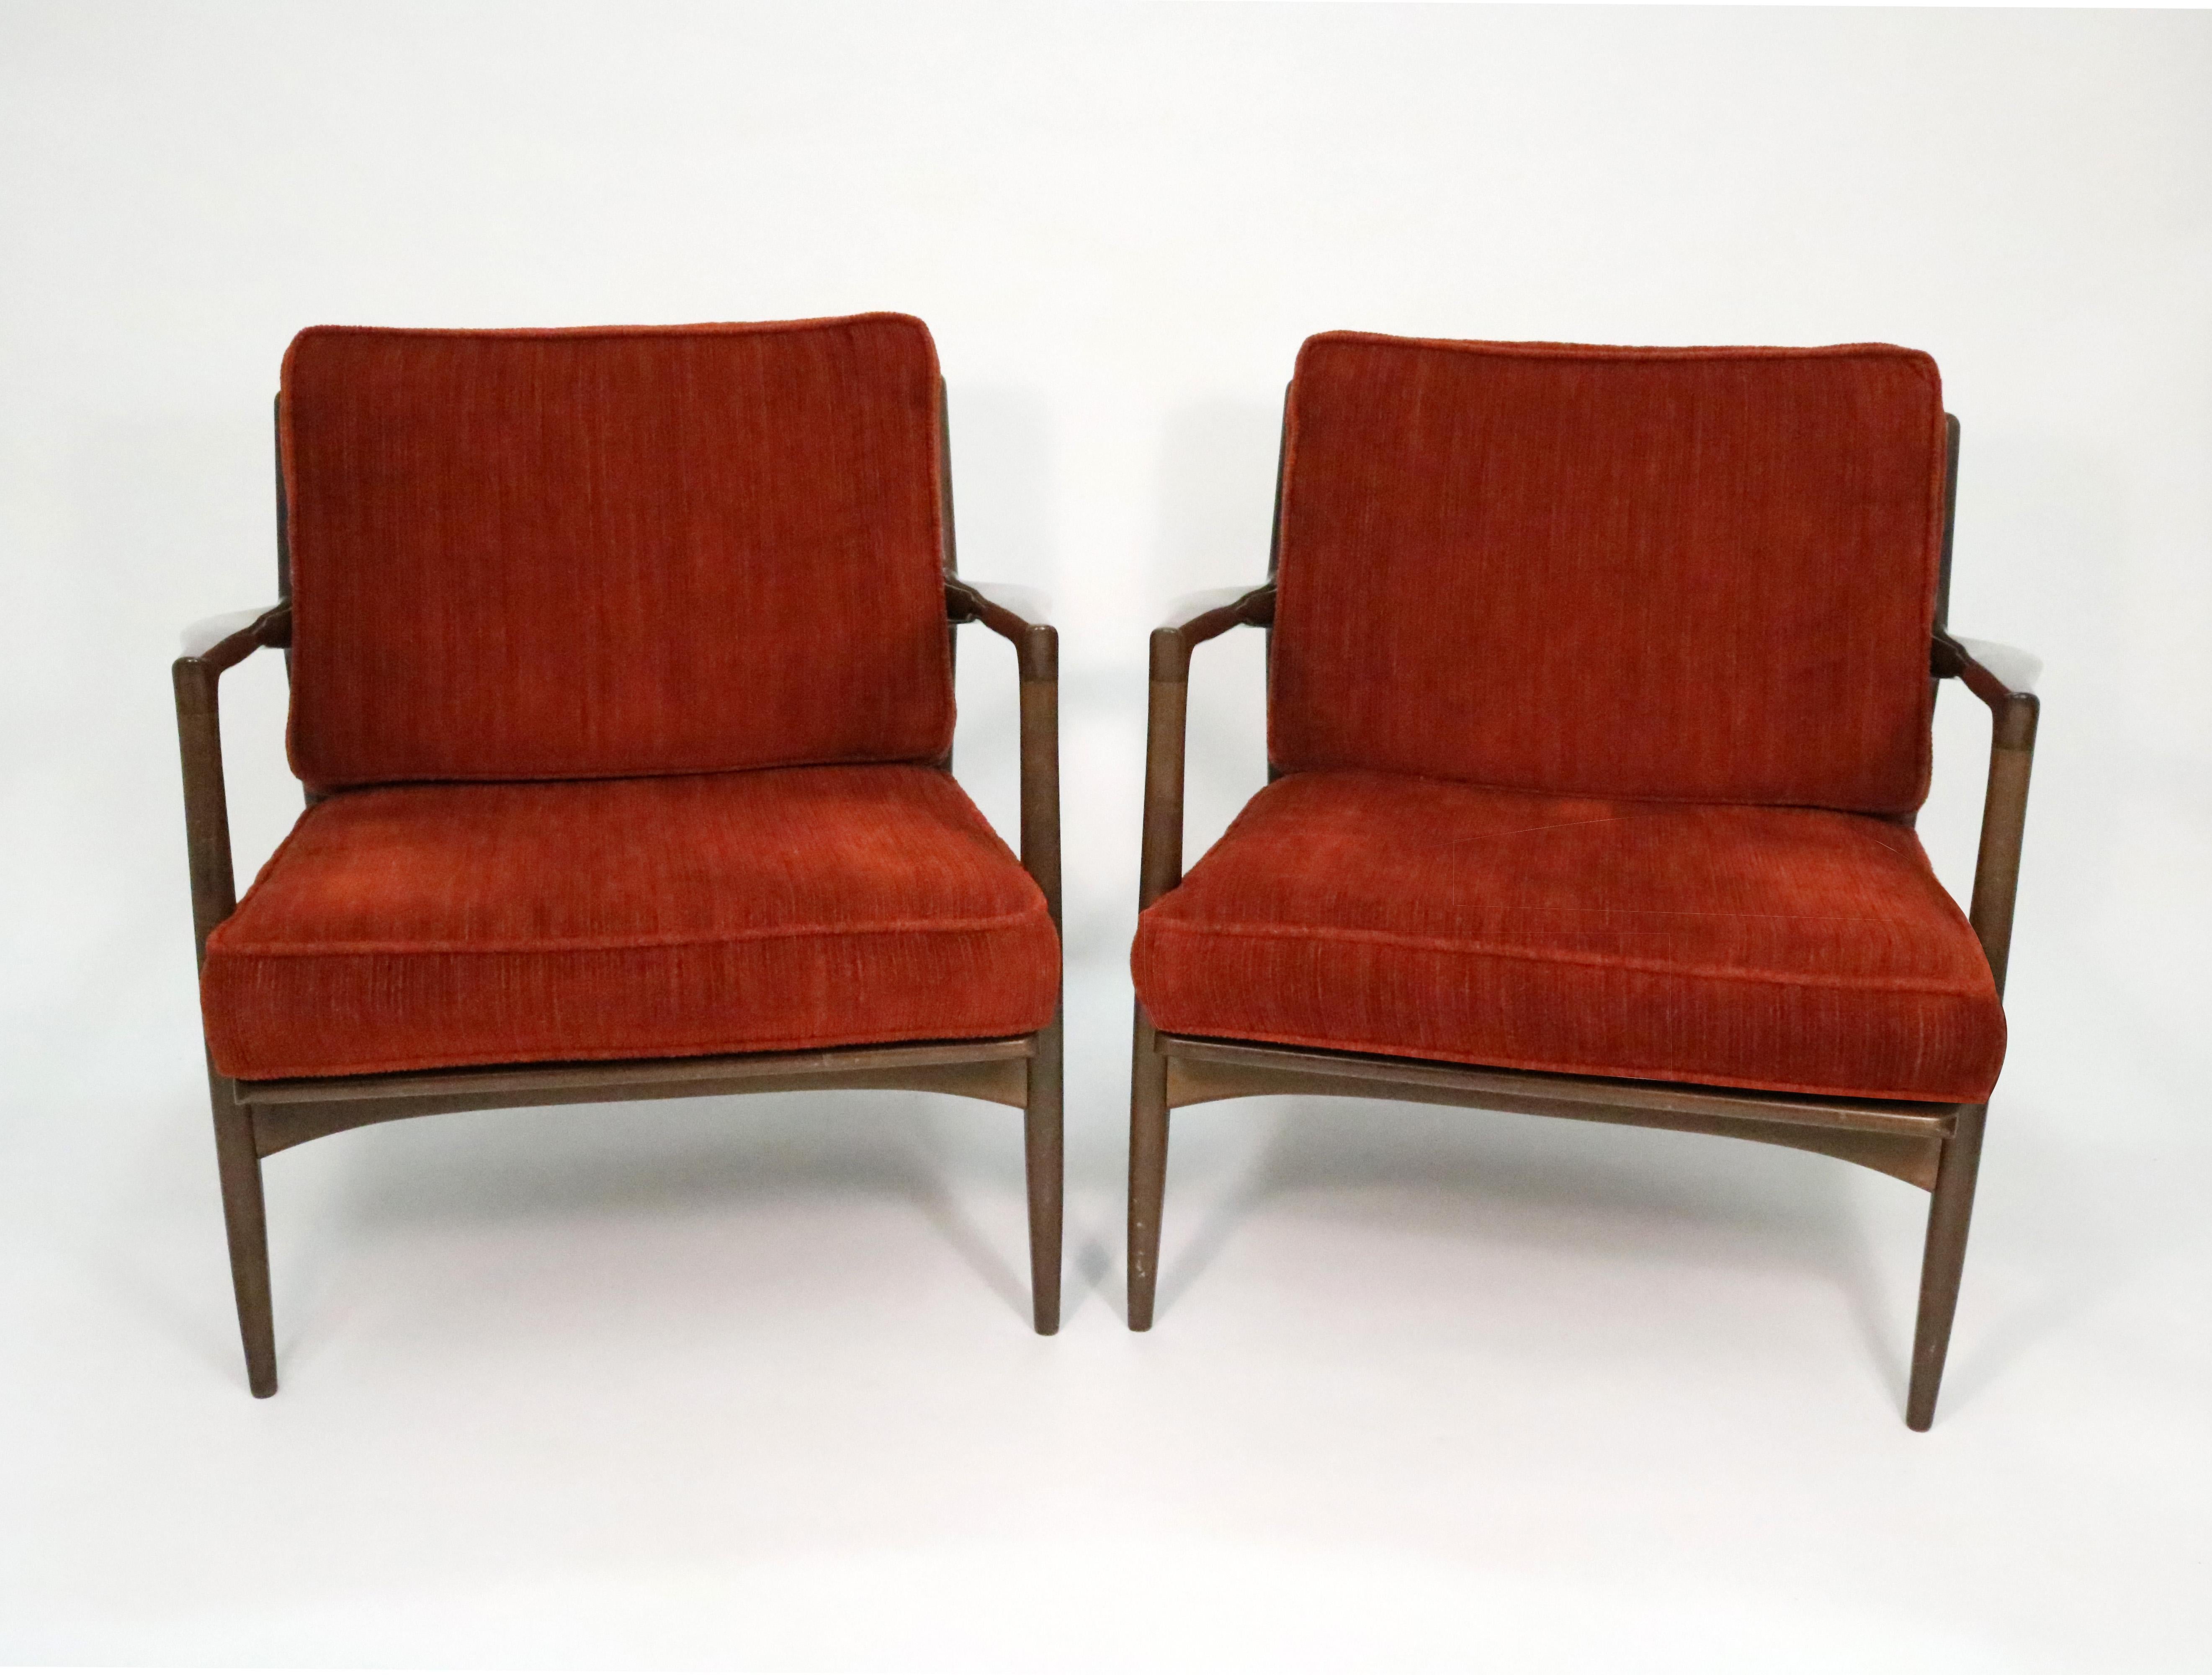 A pair of elegantly sculpted Danish Modern lounge chairs by Ib Kofod-Larsen for Selig in dark walnut.